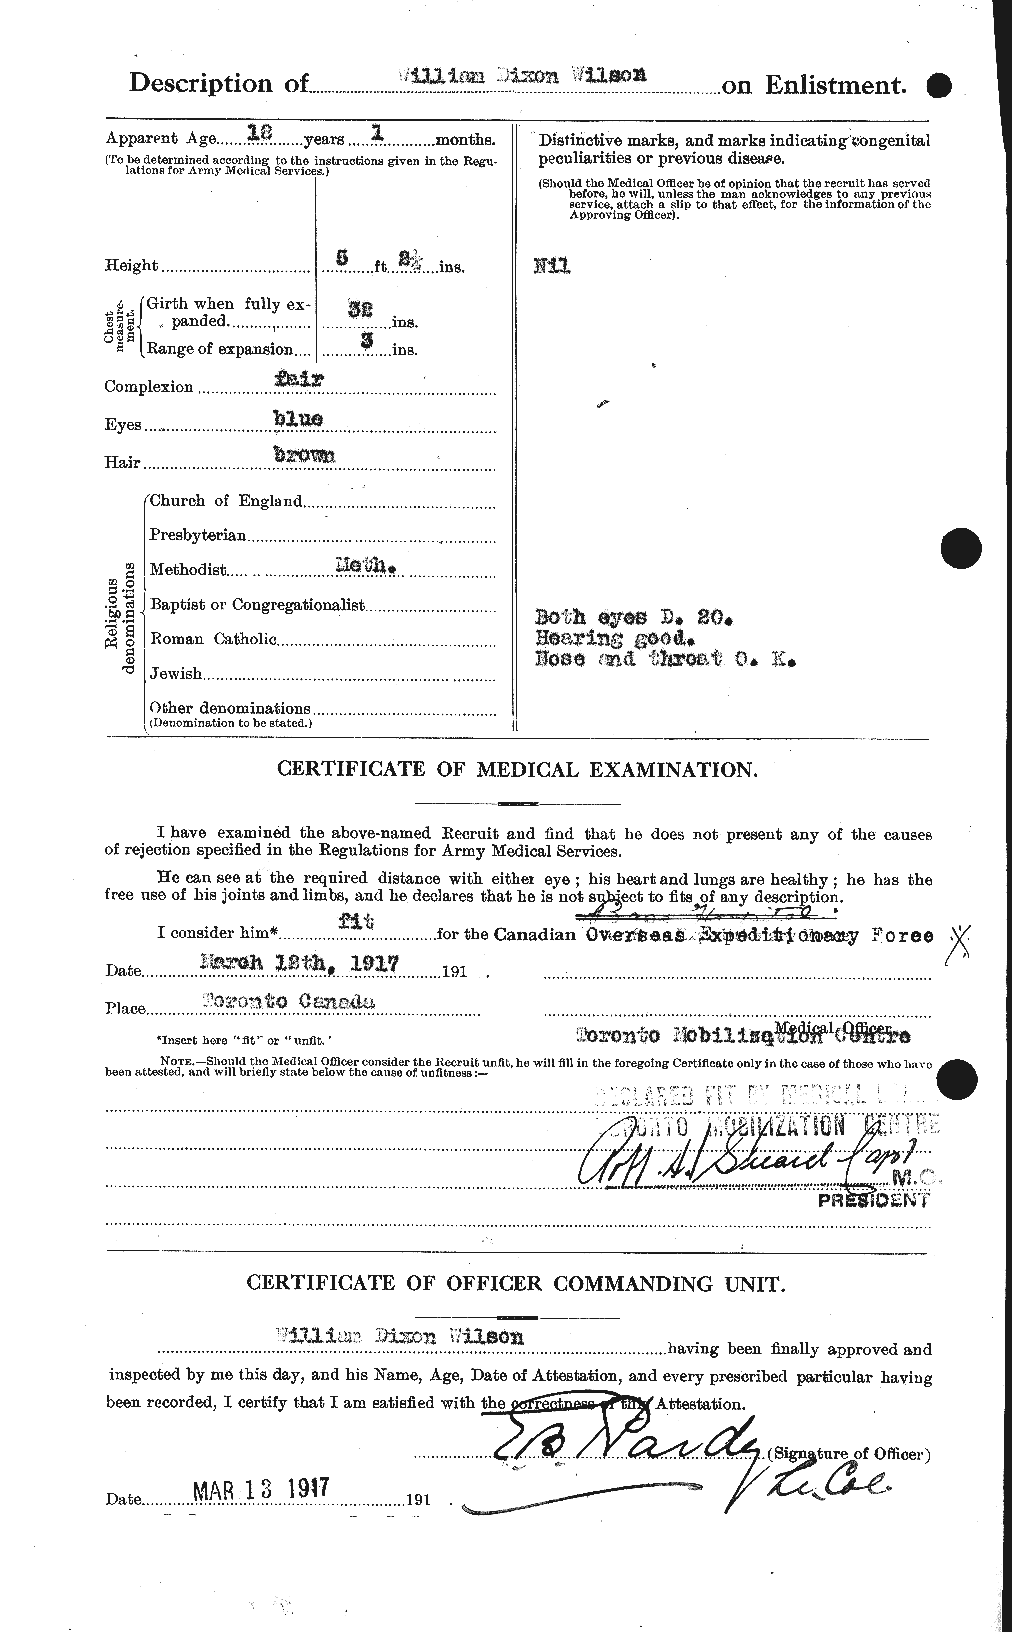 Personnel Records of the First World War - CEF 681966b